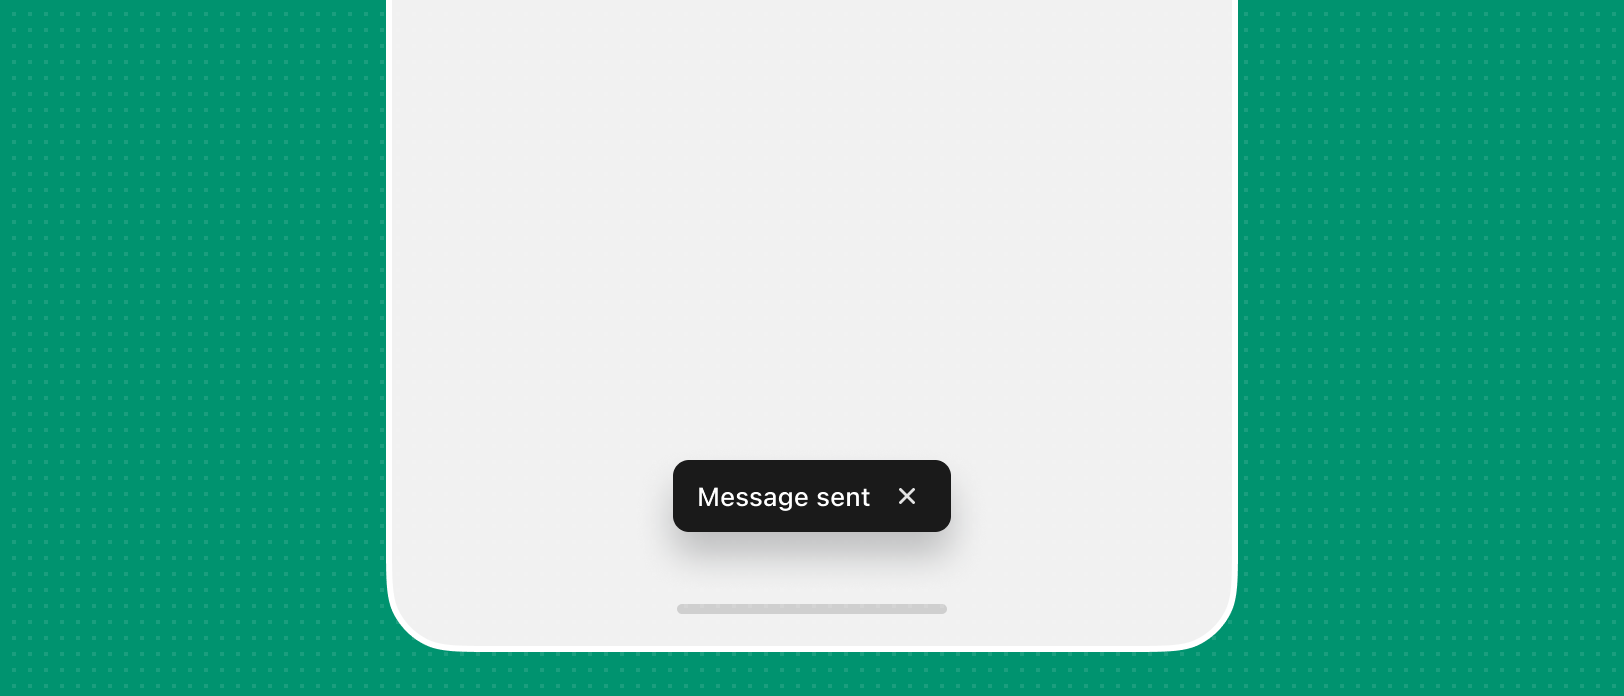 A toast placed in the bottom center of the app screen that reads 'Message sent'.